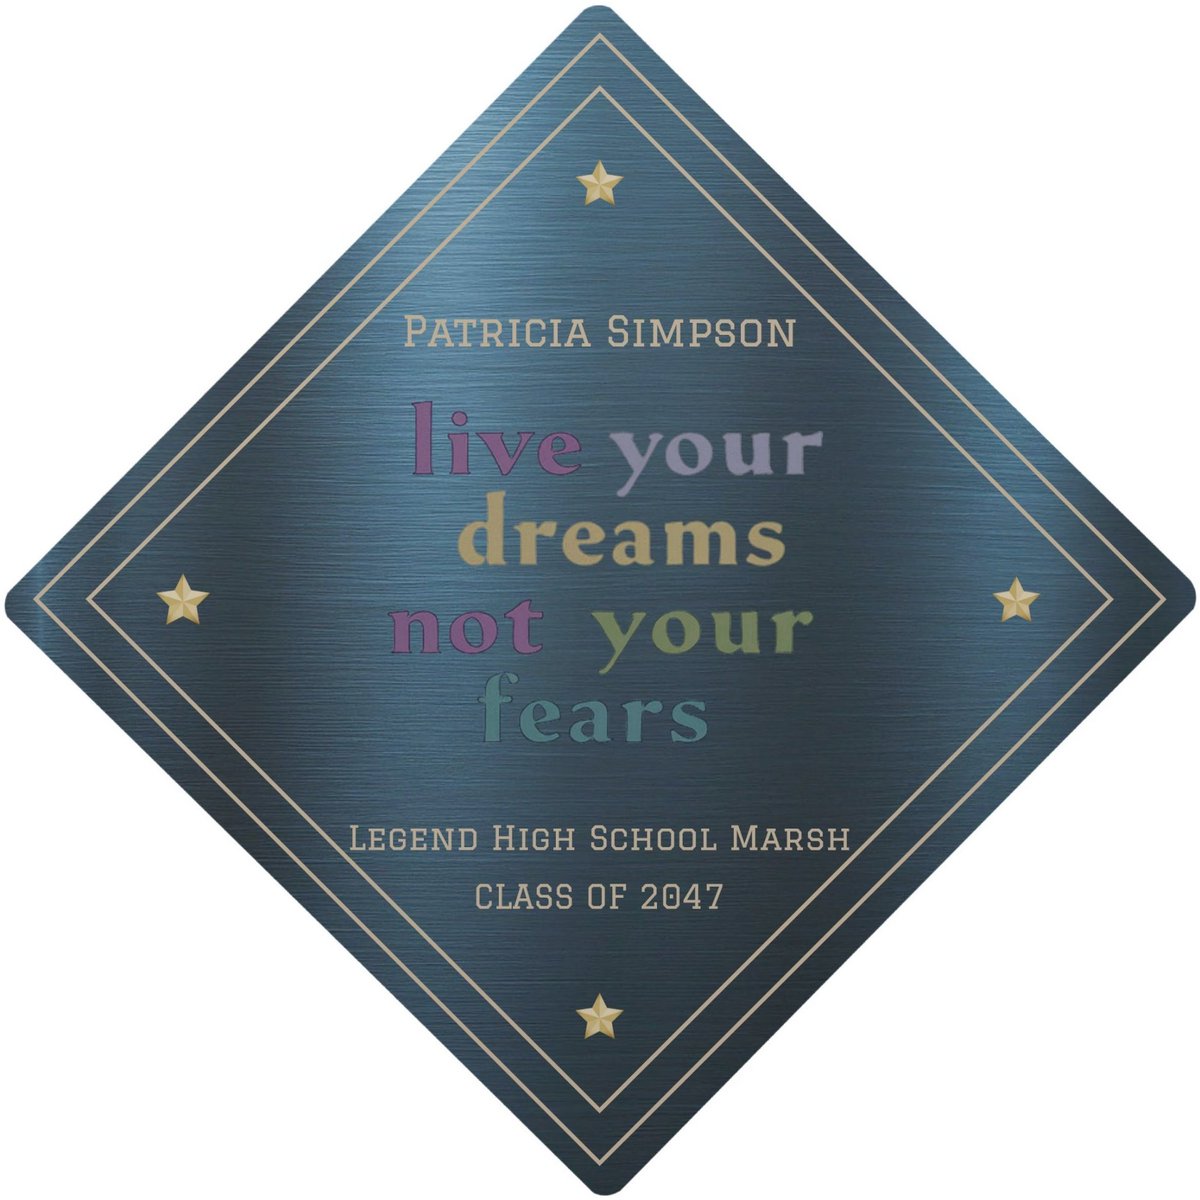 Chase Your Dreams Fearlessly zazzle.com/chase_your_dre… Cap Topper #zazzle #zazzlemade #Graduation #CapTopper #collegefun #college #highschool #School #personalizedgifts #personalisedgifts #uniquegifts #gift #gifts #giftidea #giftideas #giftshop #giftforhim #giftsforher #giftsforhim